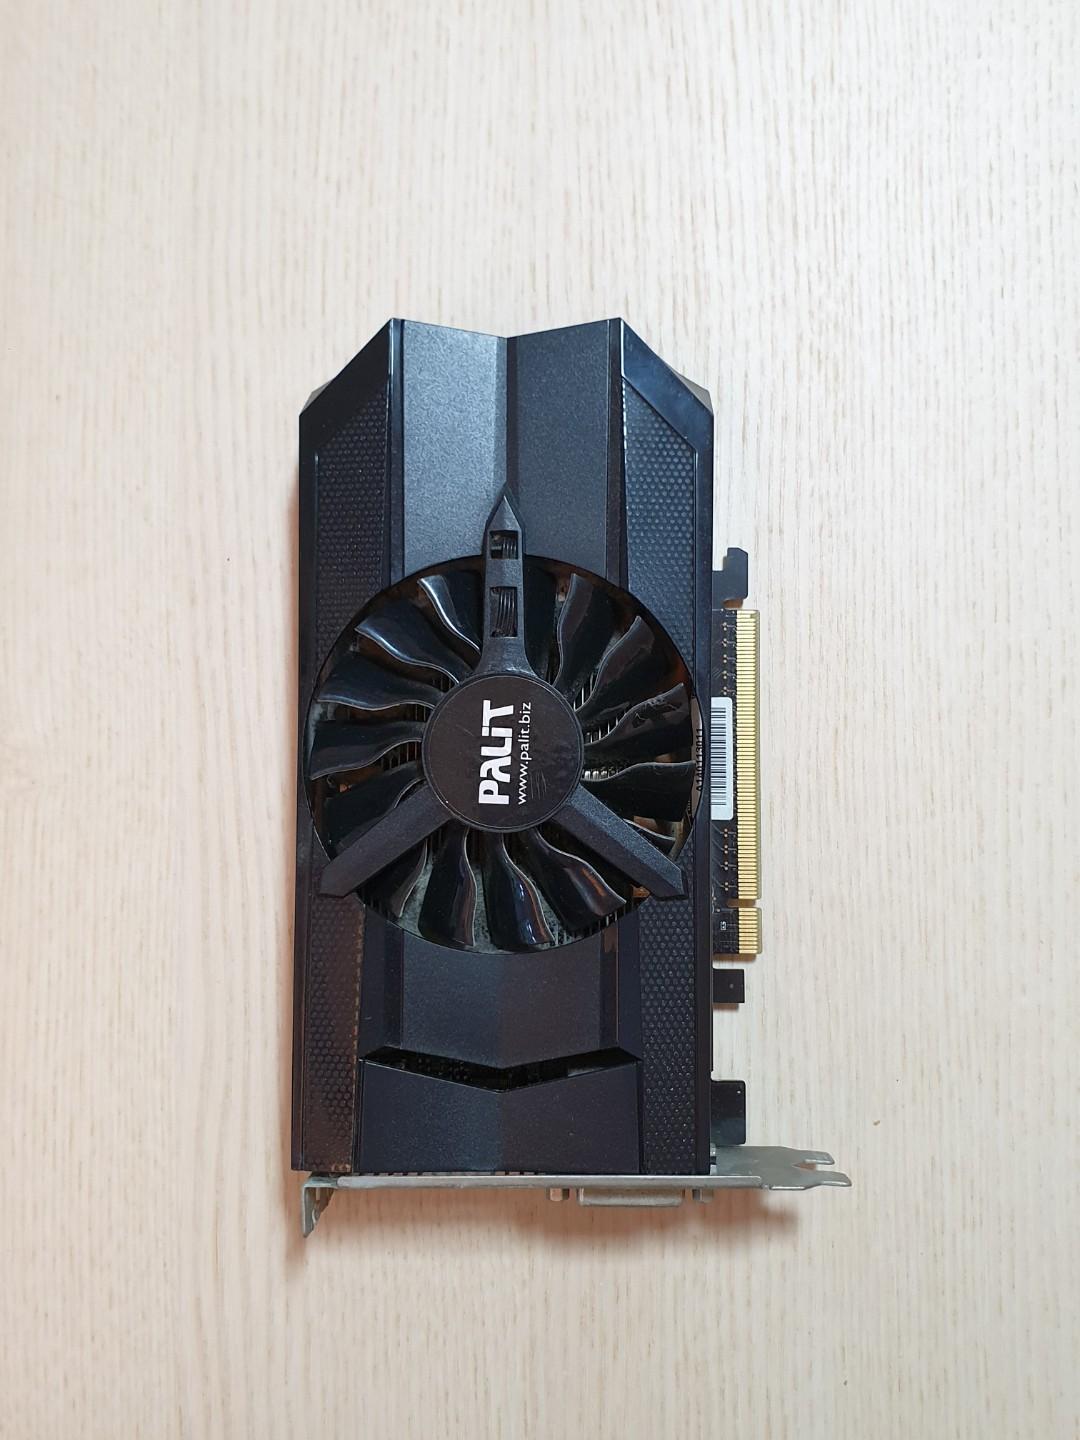 Palit Gtx 660 Electronics Computer Parts Accessories On Carousell